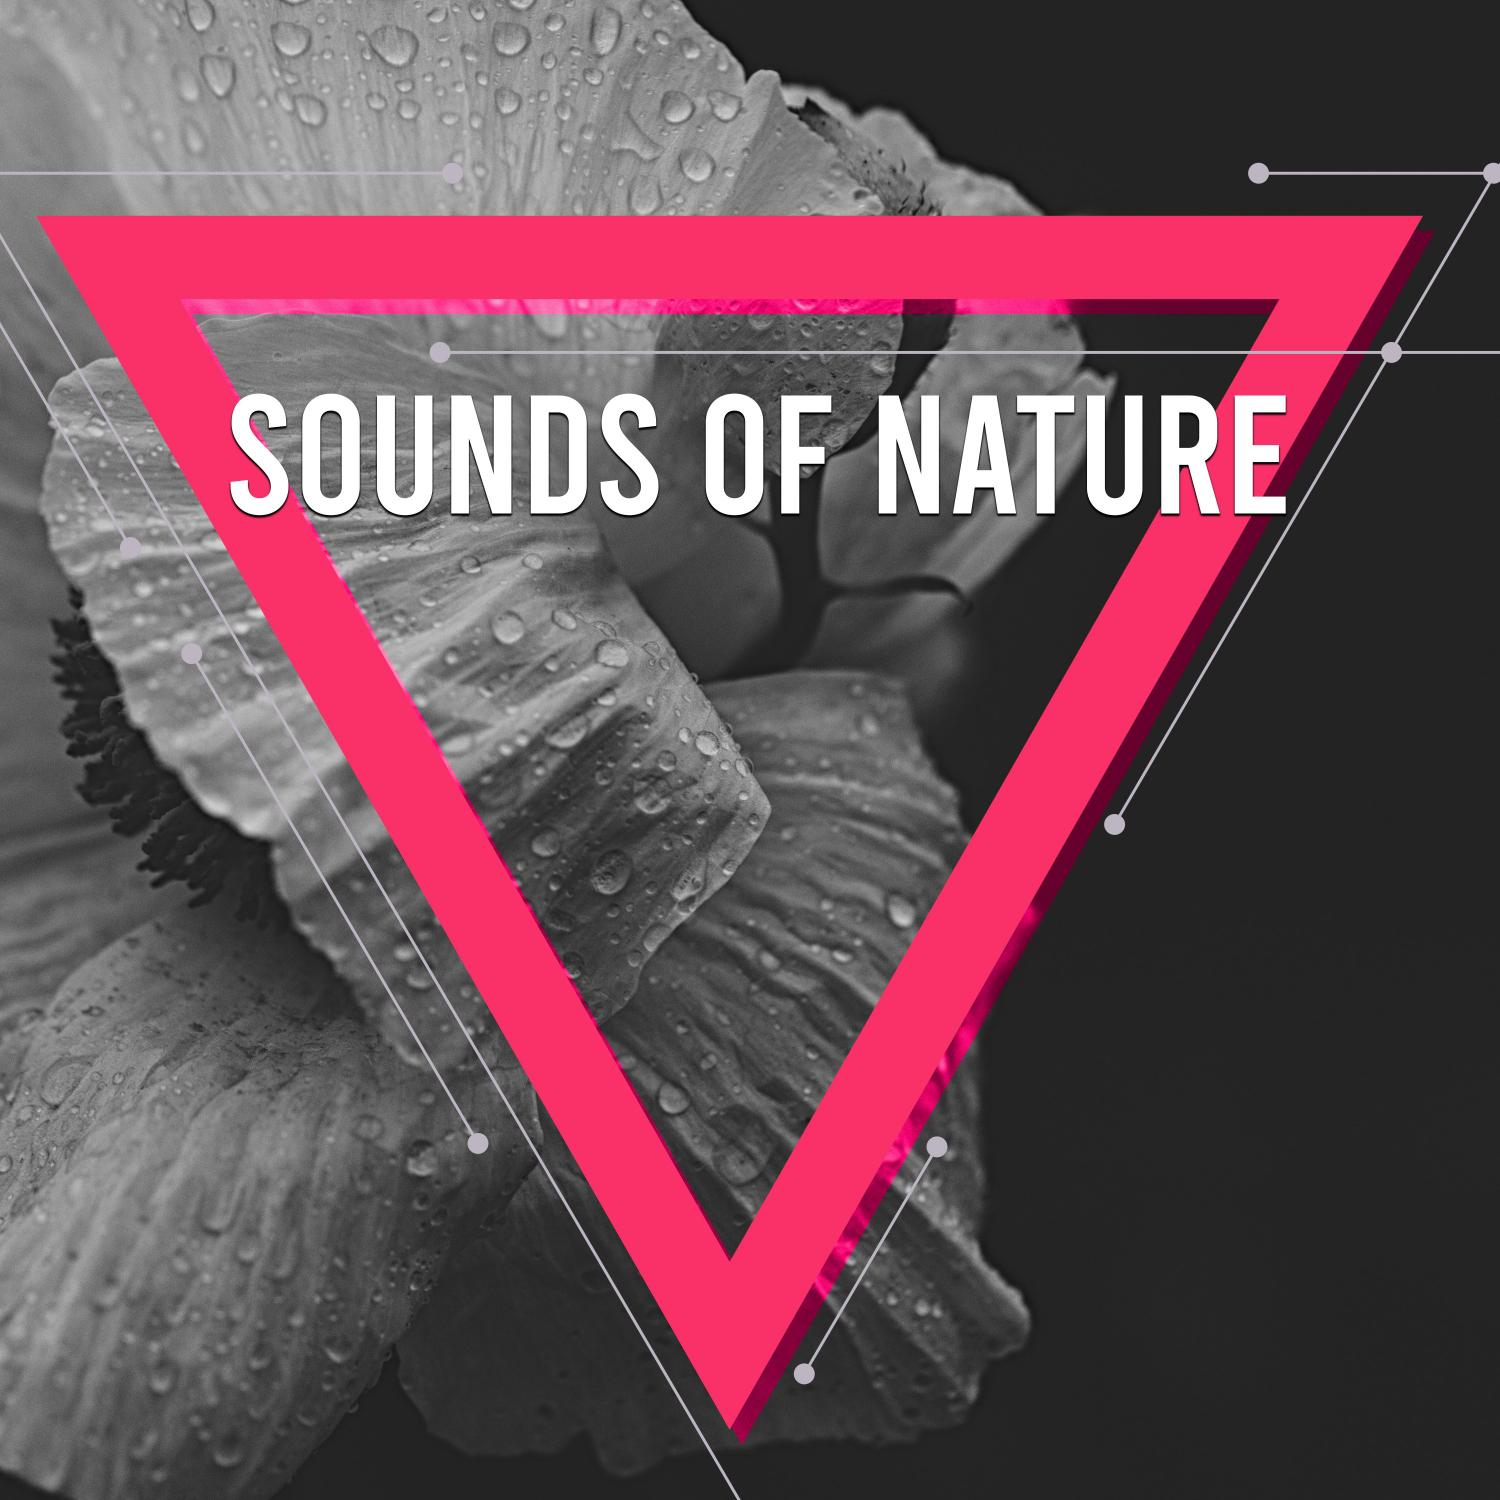 18 Sounds of Nature for Sleeping, Spa and Meditation